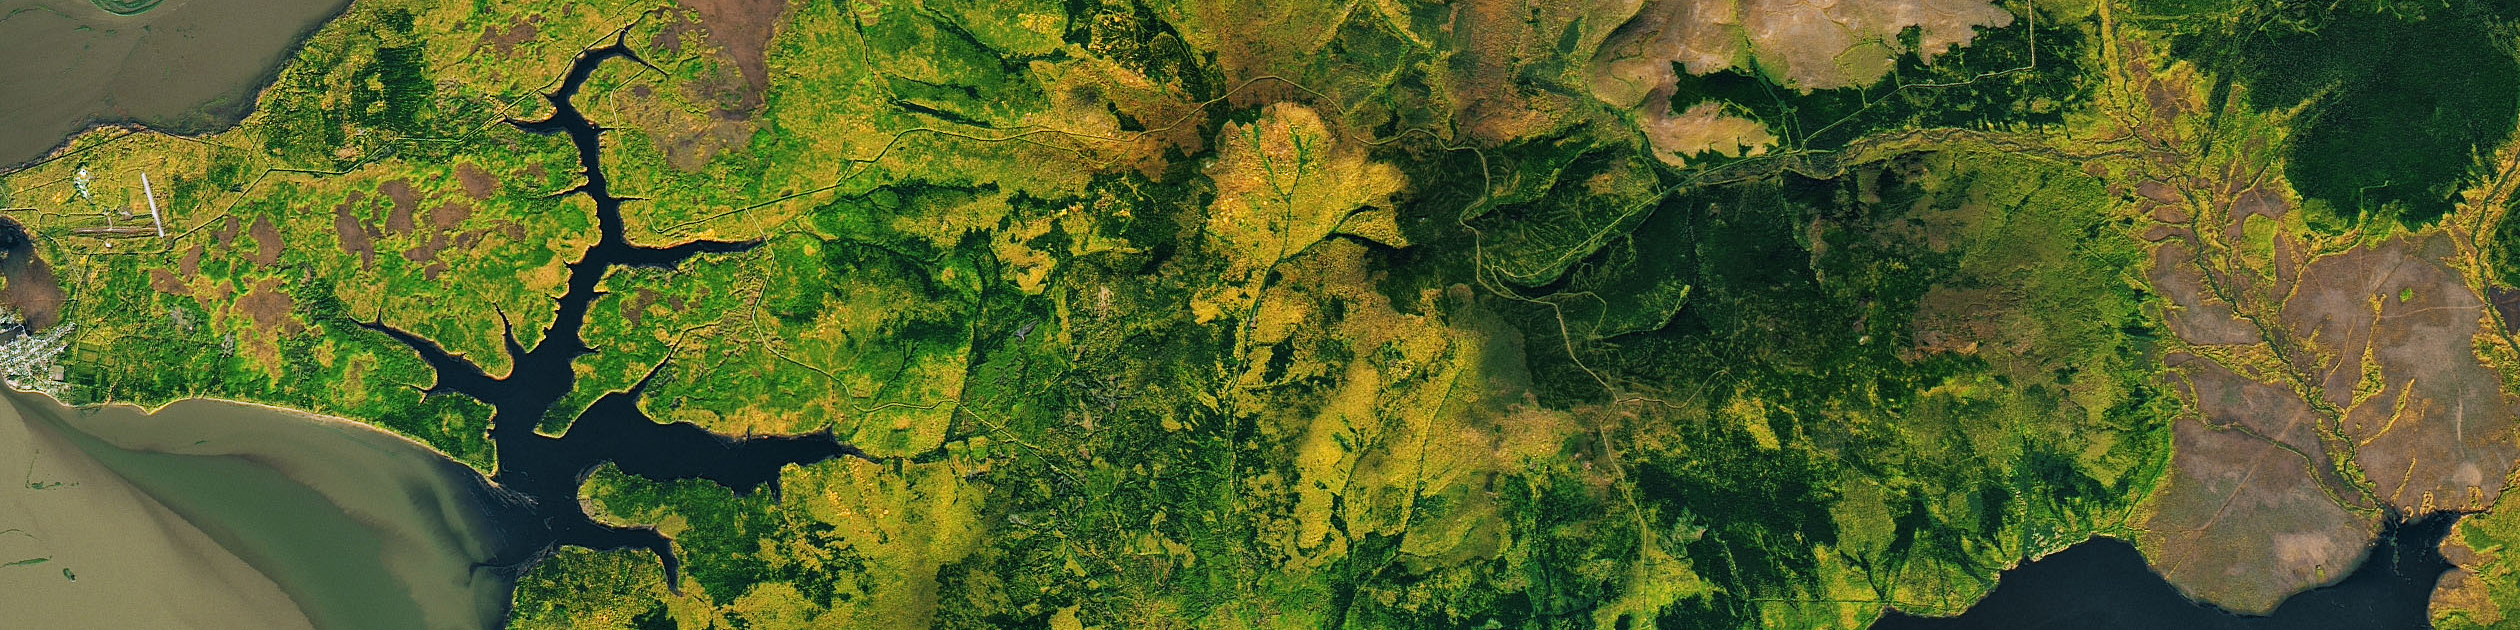 Landsat 8 image of fall foliage near the Amur River along the Chinese-Russian border.